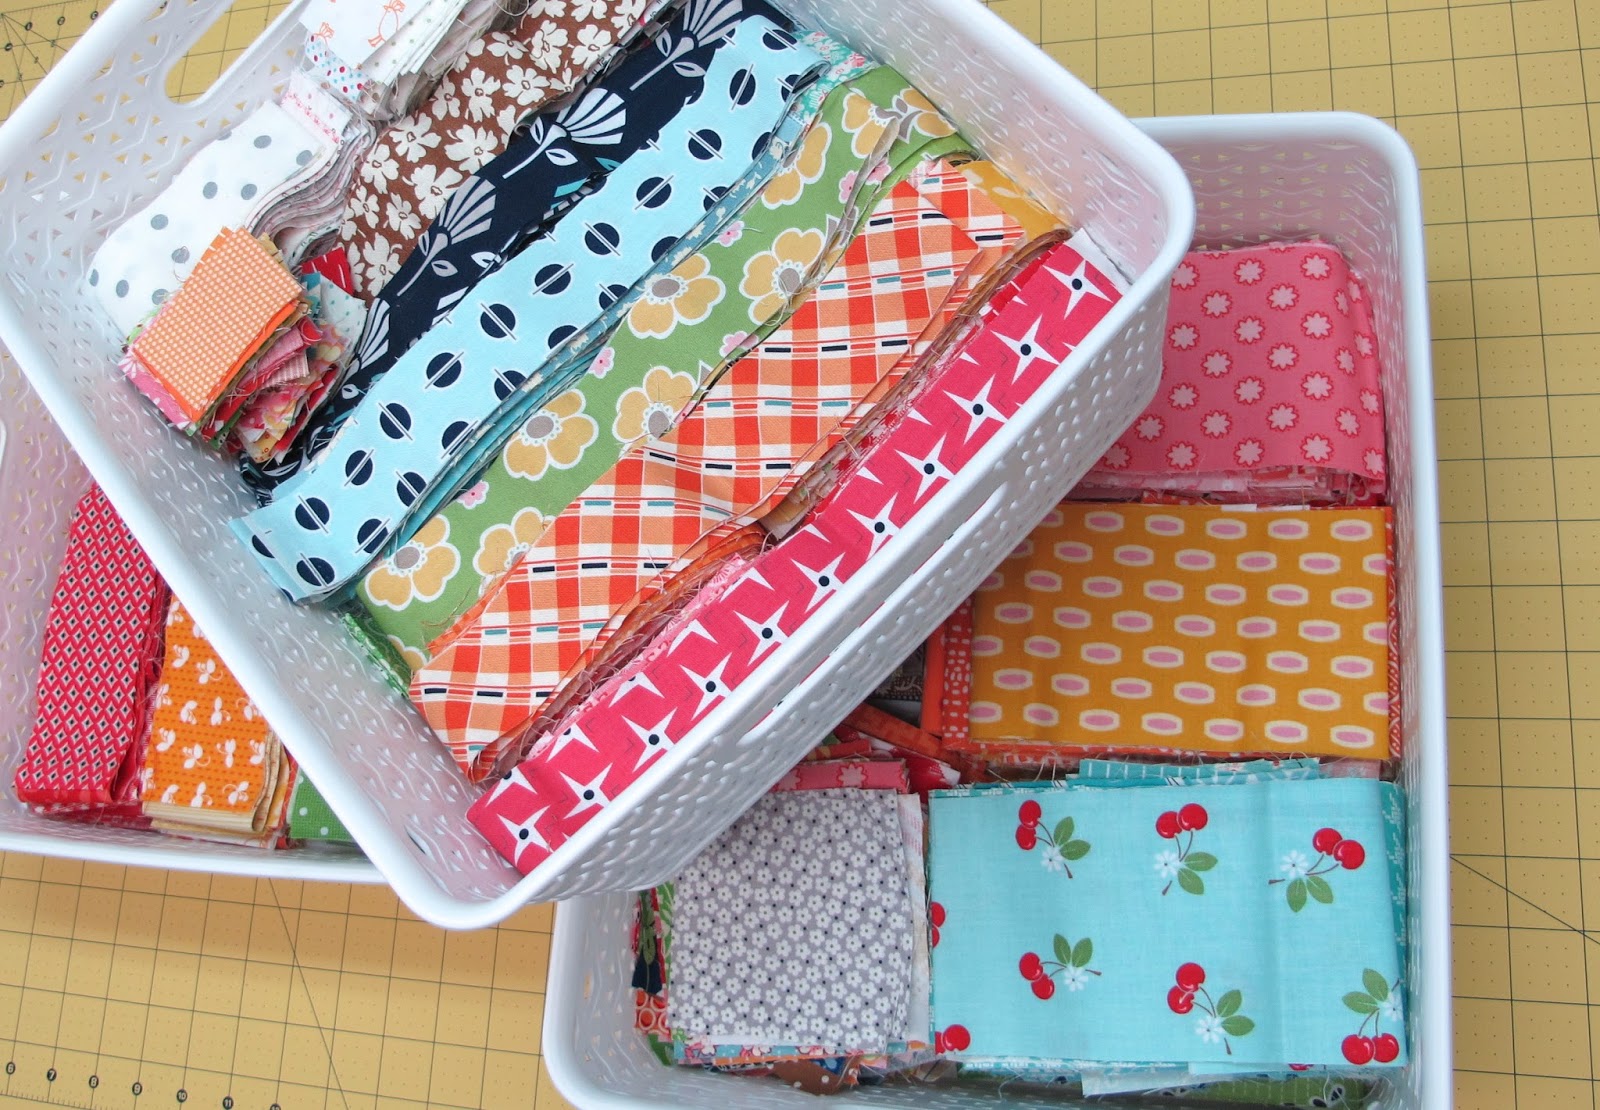 NSM How to Organize Fabric Scraps - The Sewing Loft